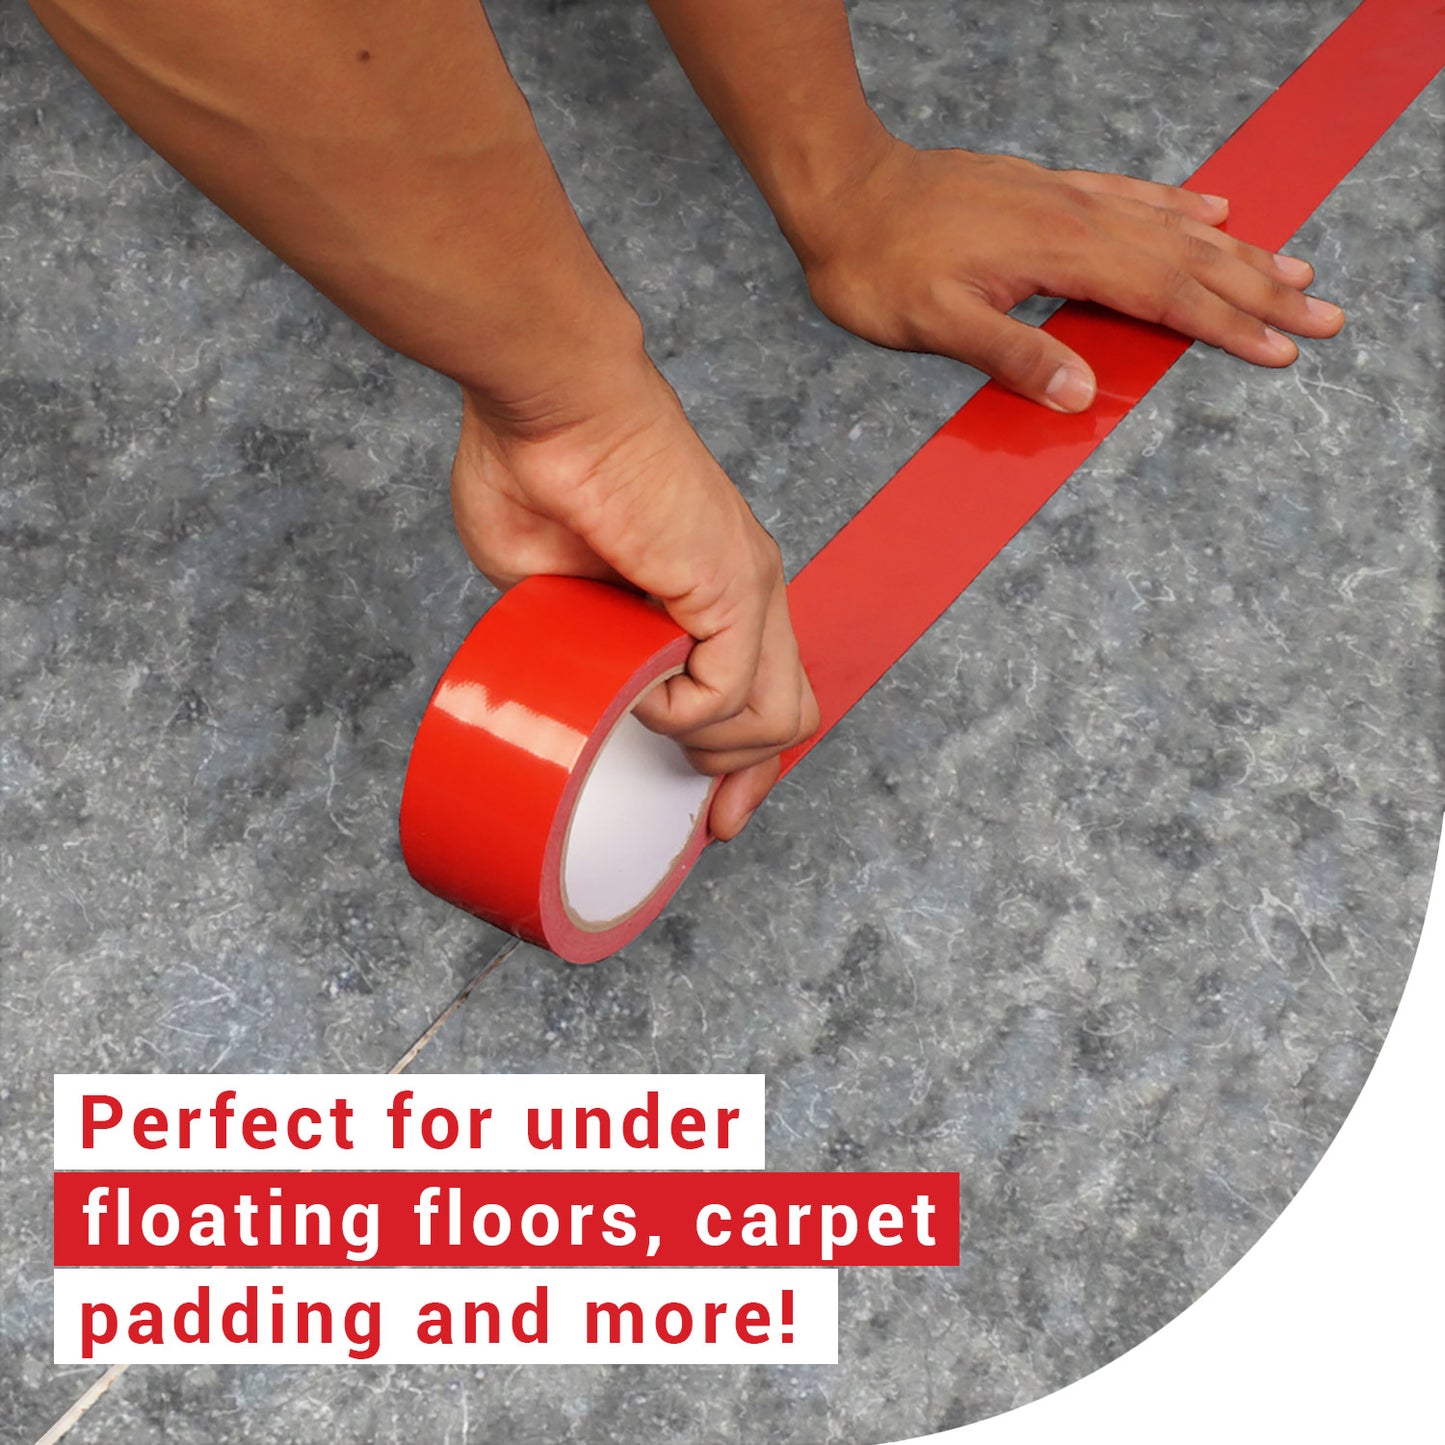 Perfect for under floating floors and carpet padding